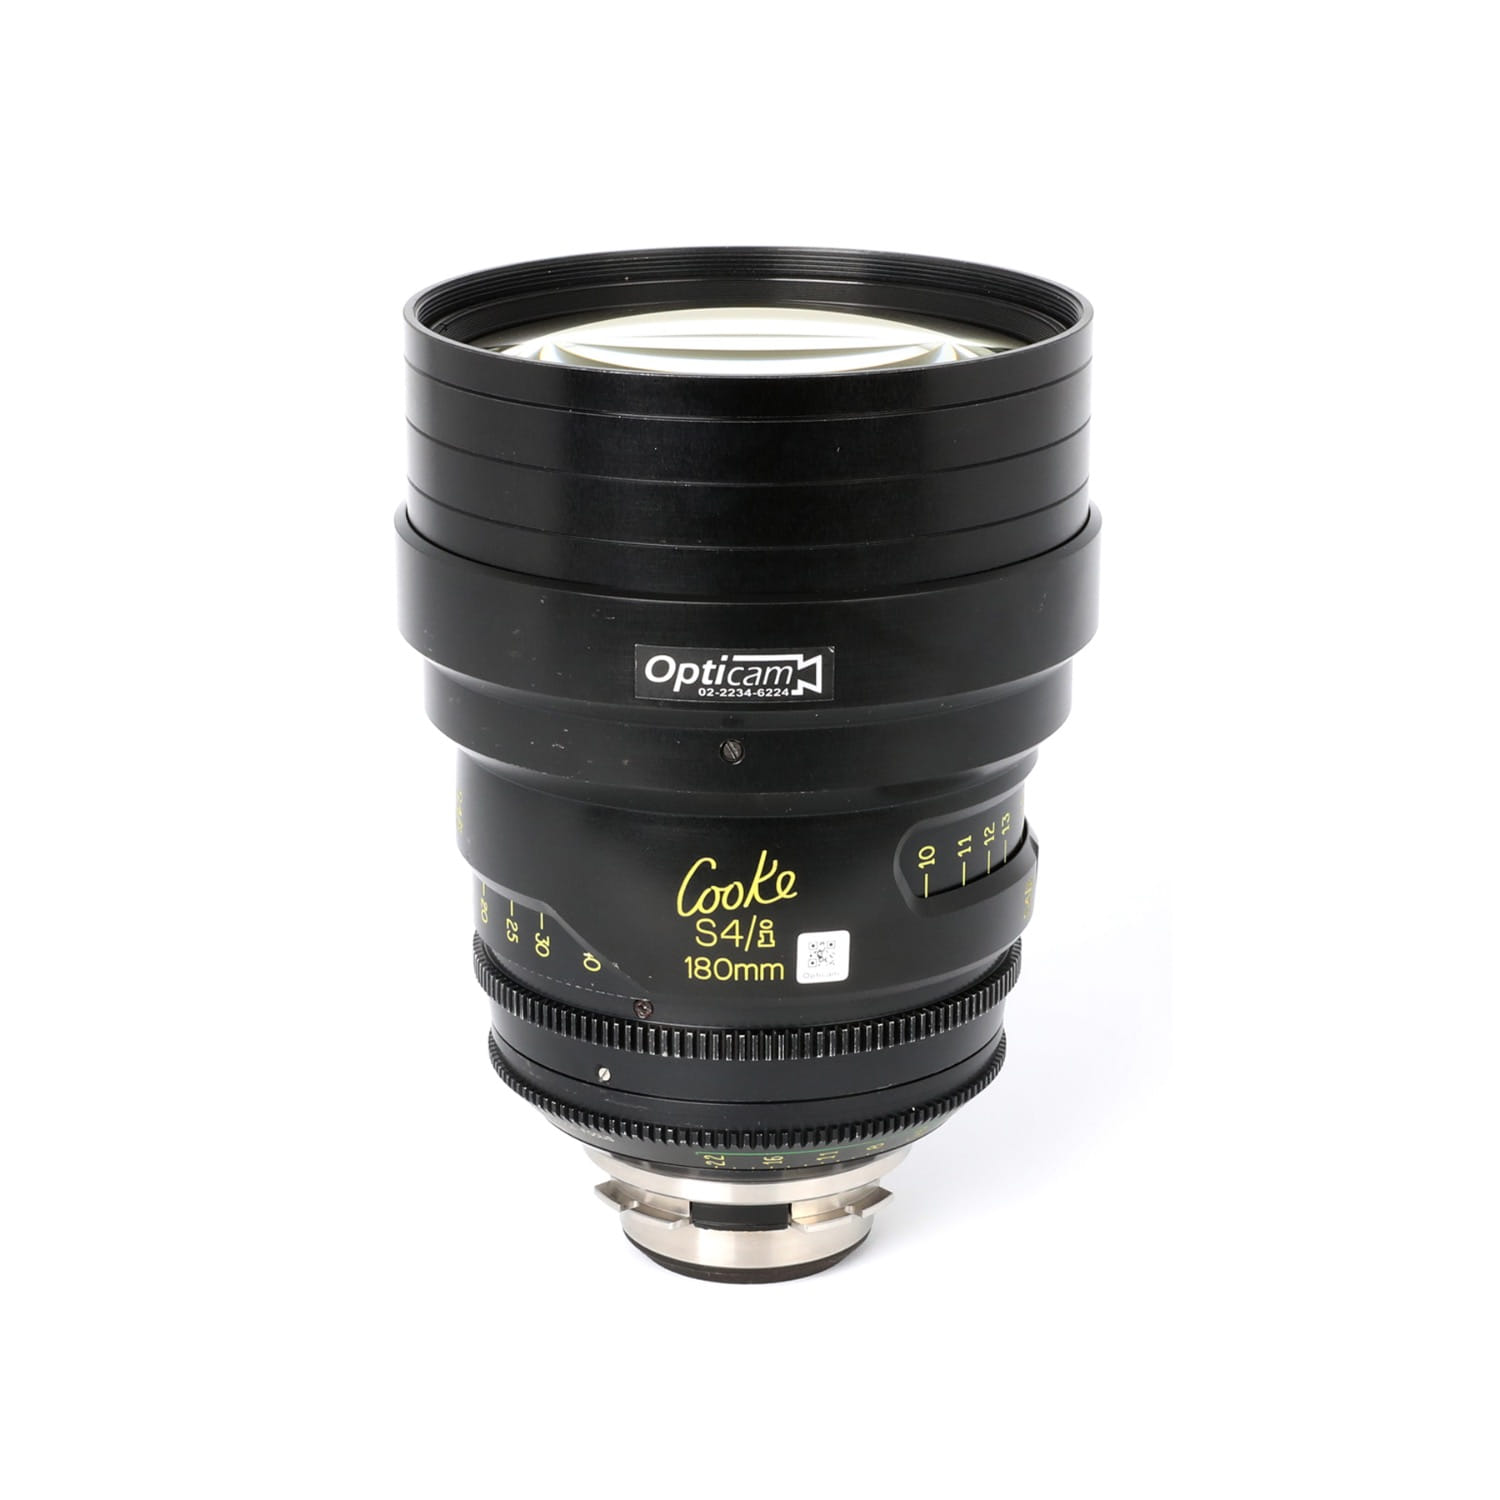 Cooke S4 180mm